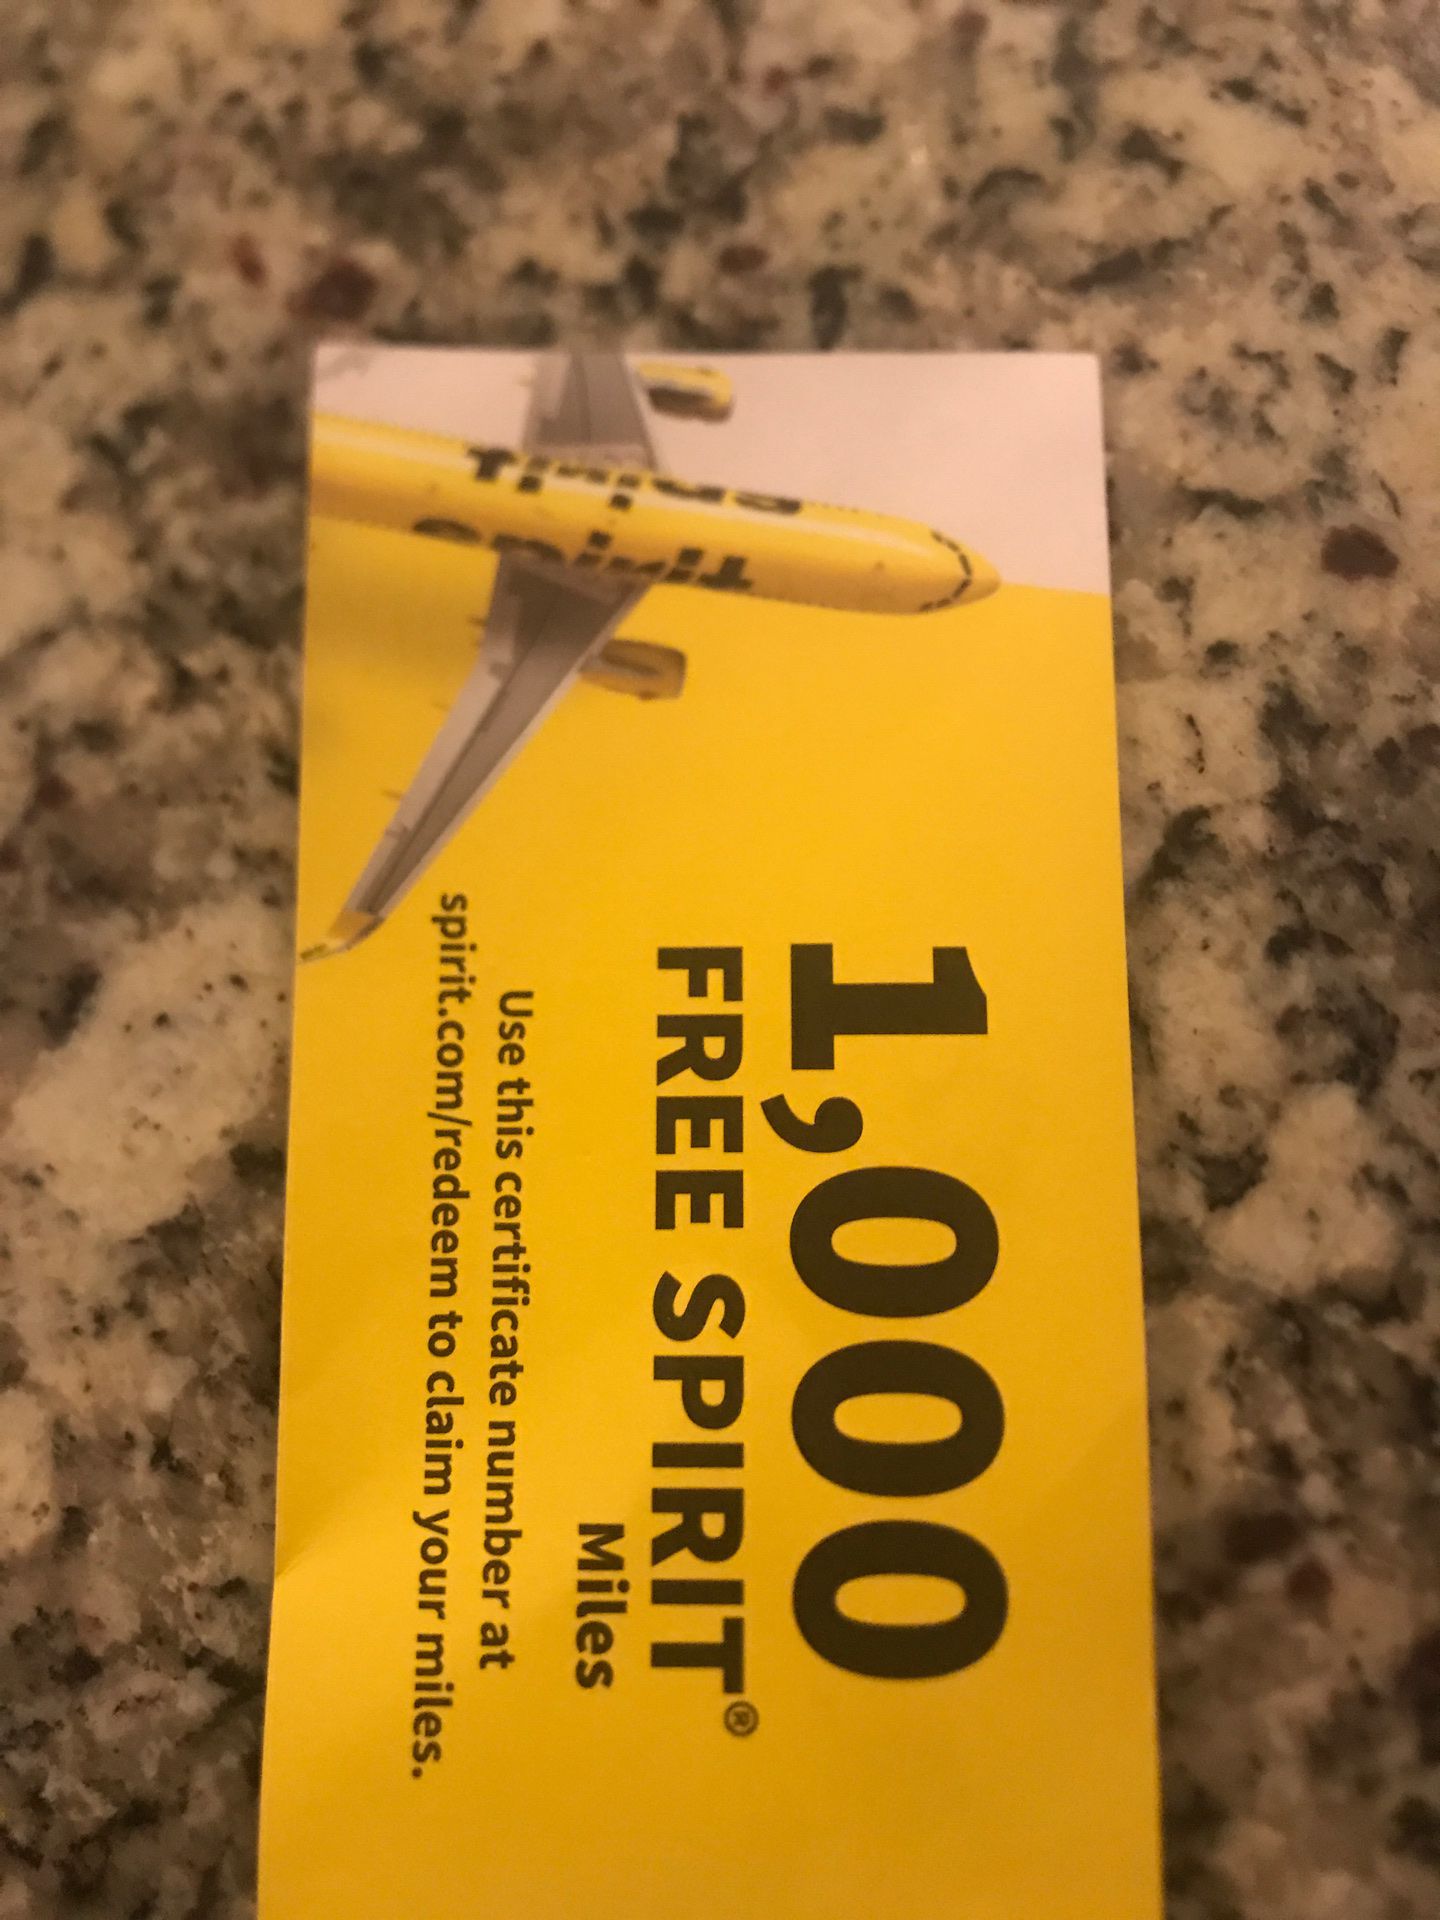 1000 miles Spirit voucher.. Can be used for any destination